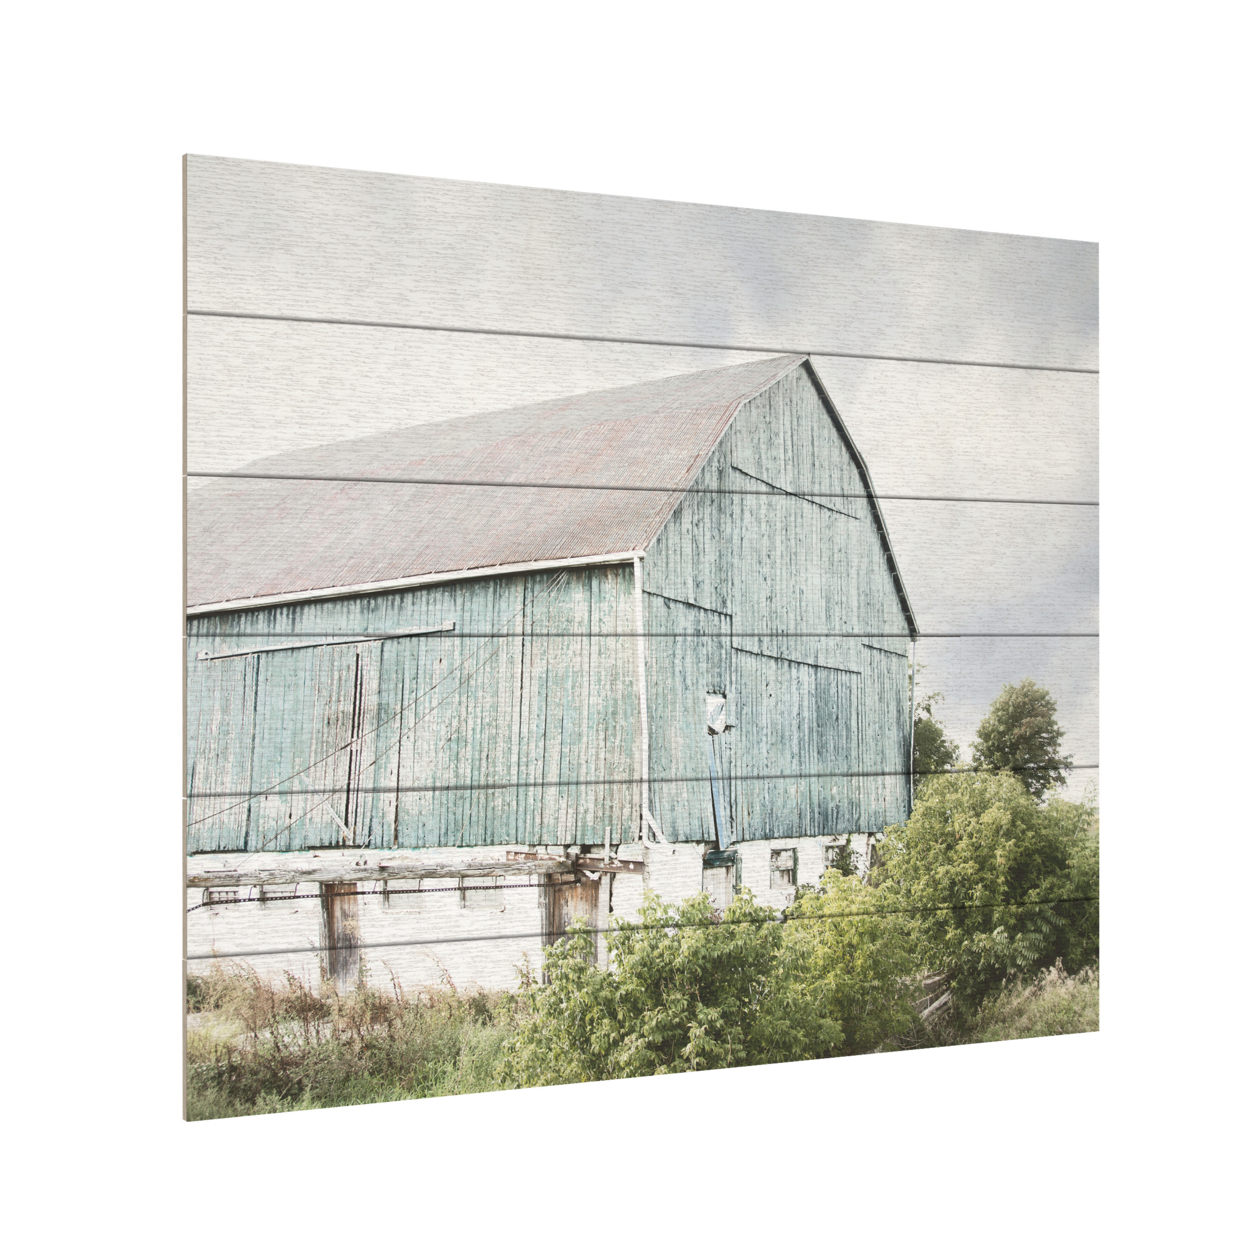 Wooden Slat Art 18 X 22 Inches Titled Late Summer Barn I Crop Ready To Hang Home Decor Picture